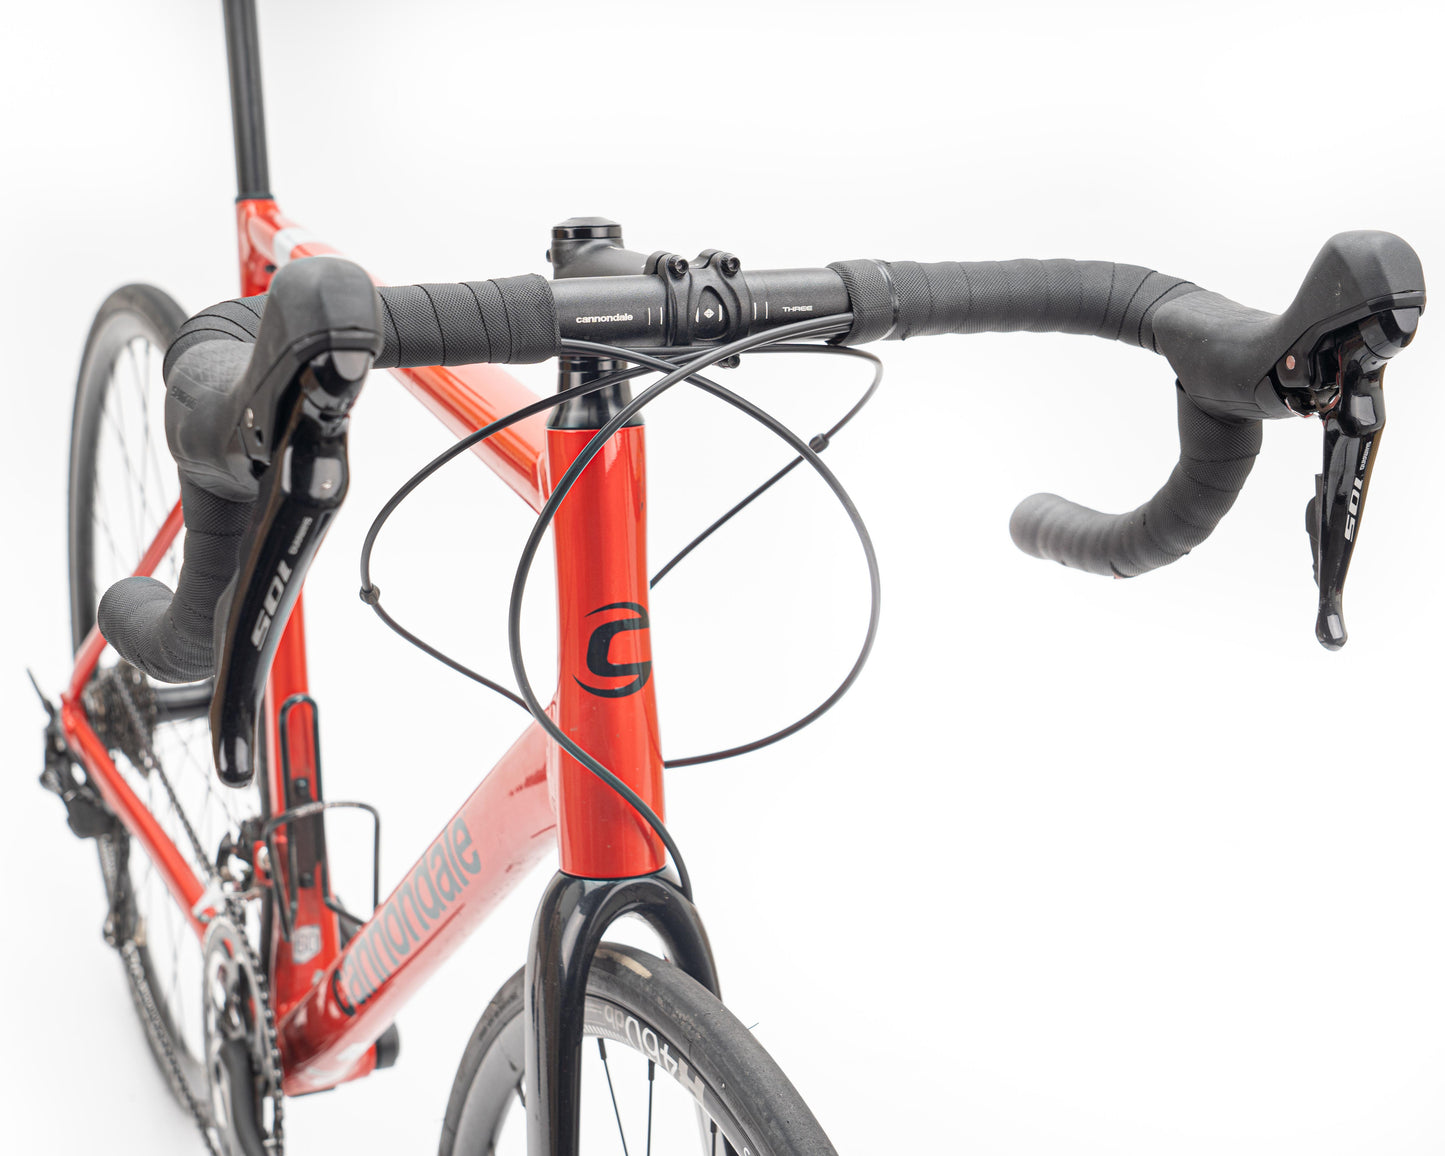 2021 Cannondale CAAD13 Disc 105 Candy Red 60 (CPO)